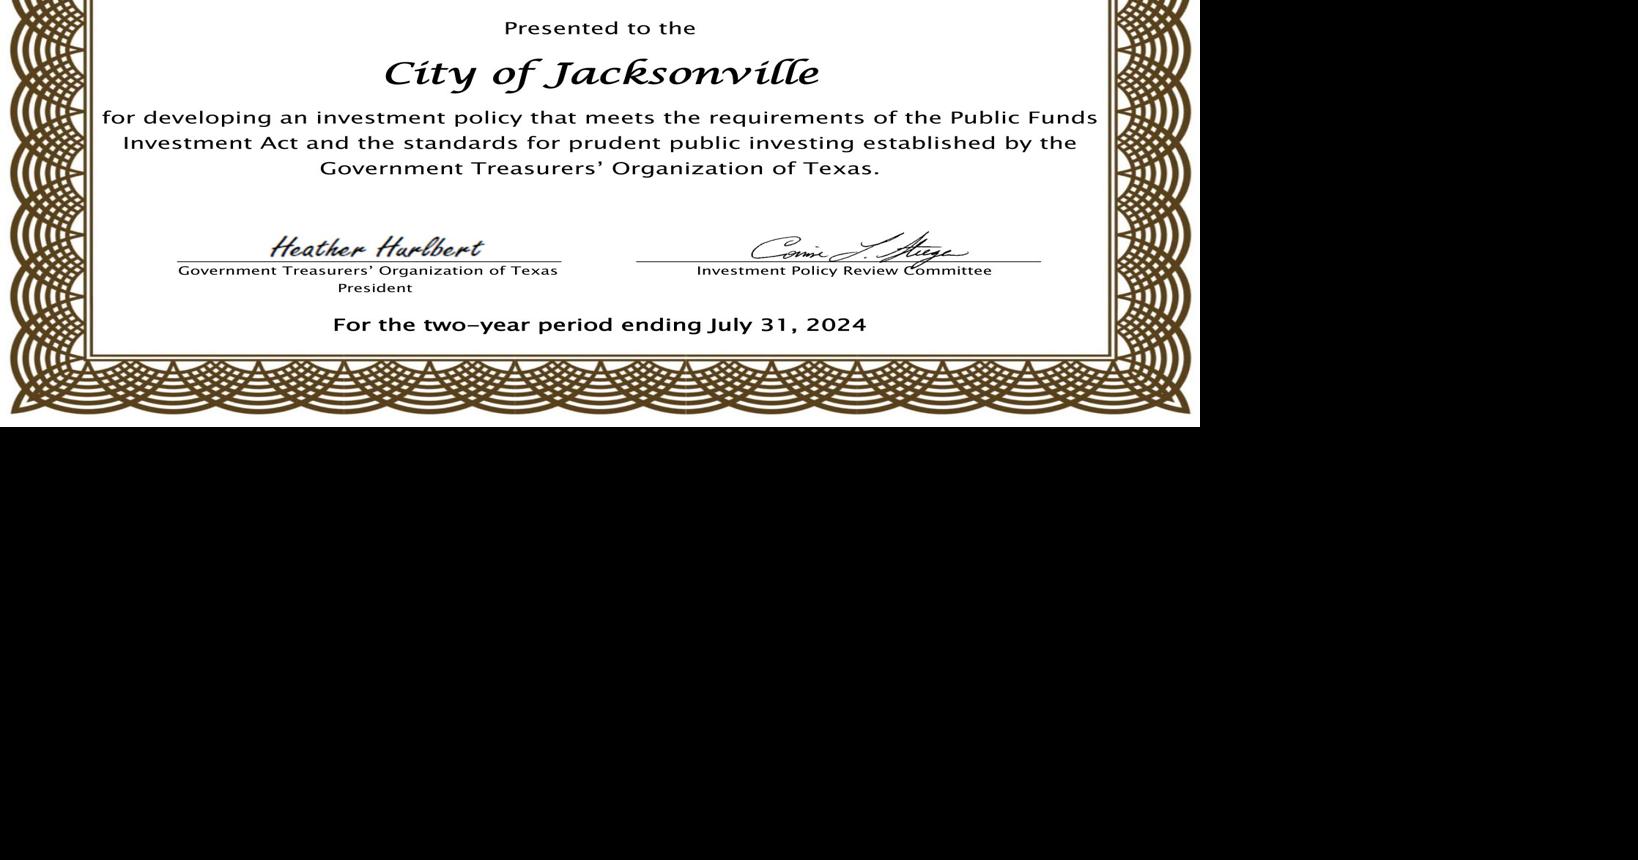 City of Jacksonville receives Investment Certificate of Distinction